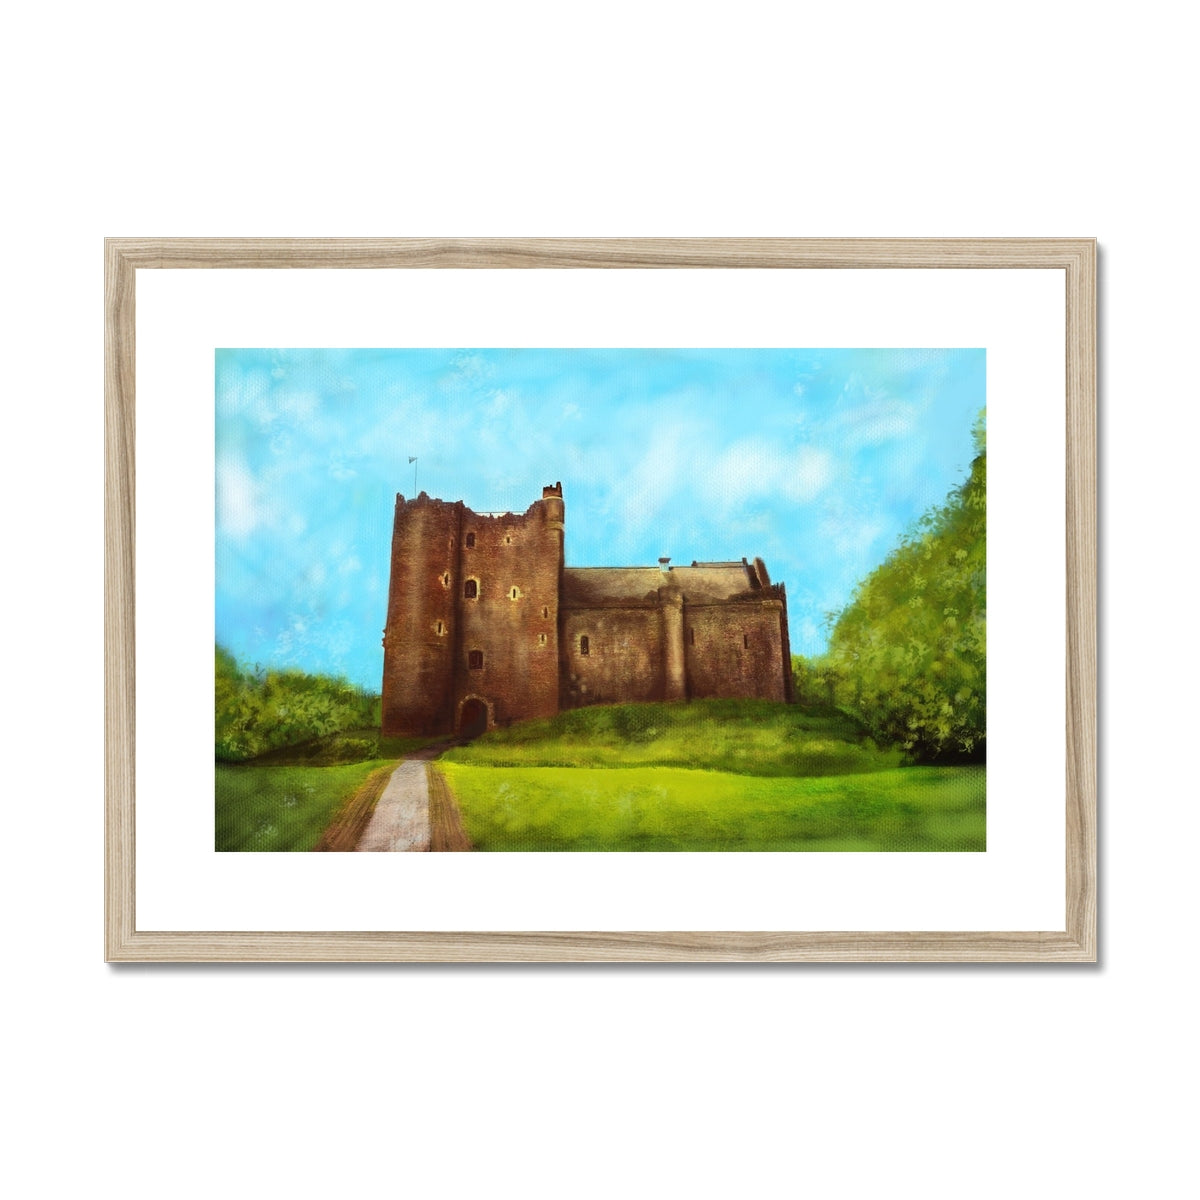 Doune Castle Painting | Framed & Mounted Prints From Scotland-Framed & Mounted Prints-Historic & Iconic Scotland Art Gallery-A2 Landscape-Natural Frame-Paintings, Prints, Homeware, Art Gifts From Scotland By Scottish Artist Kevin Hunter